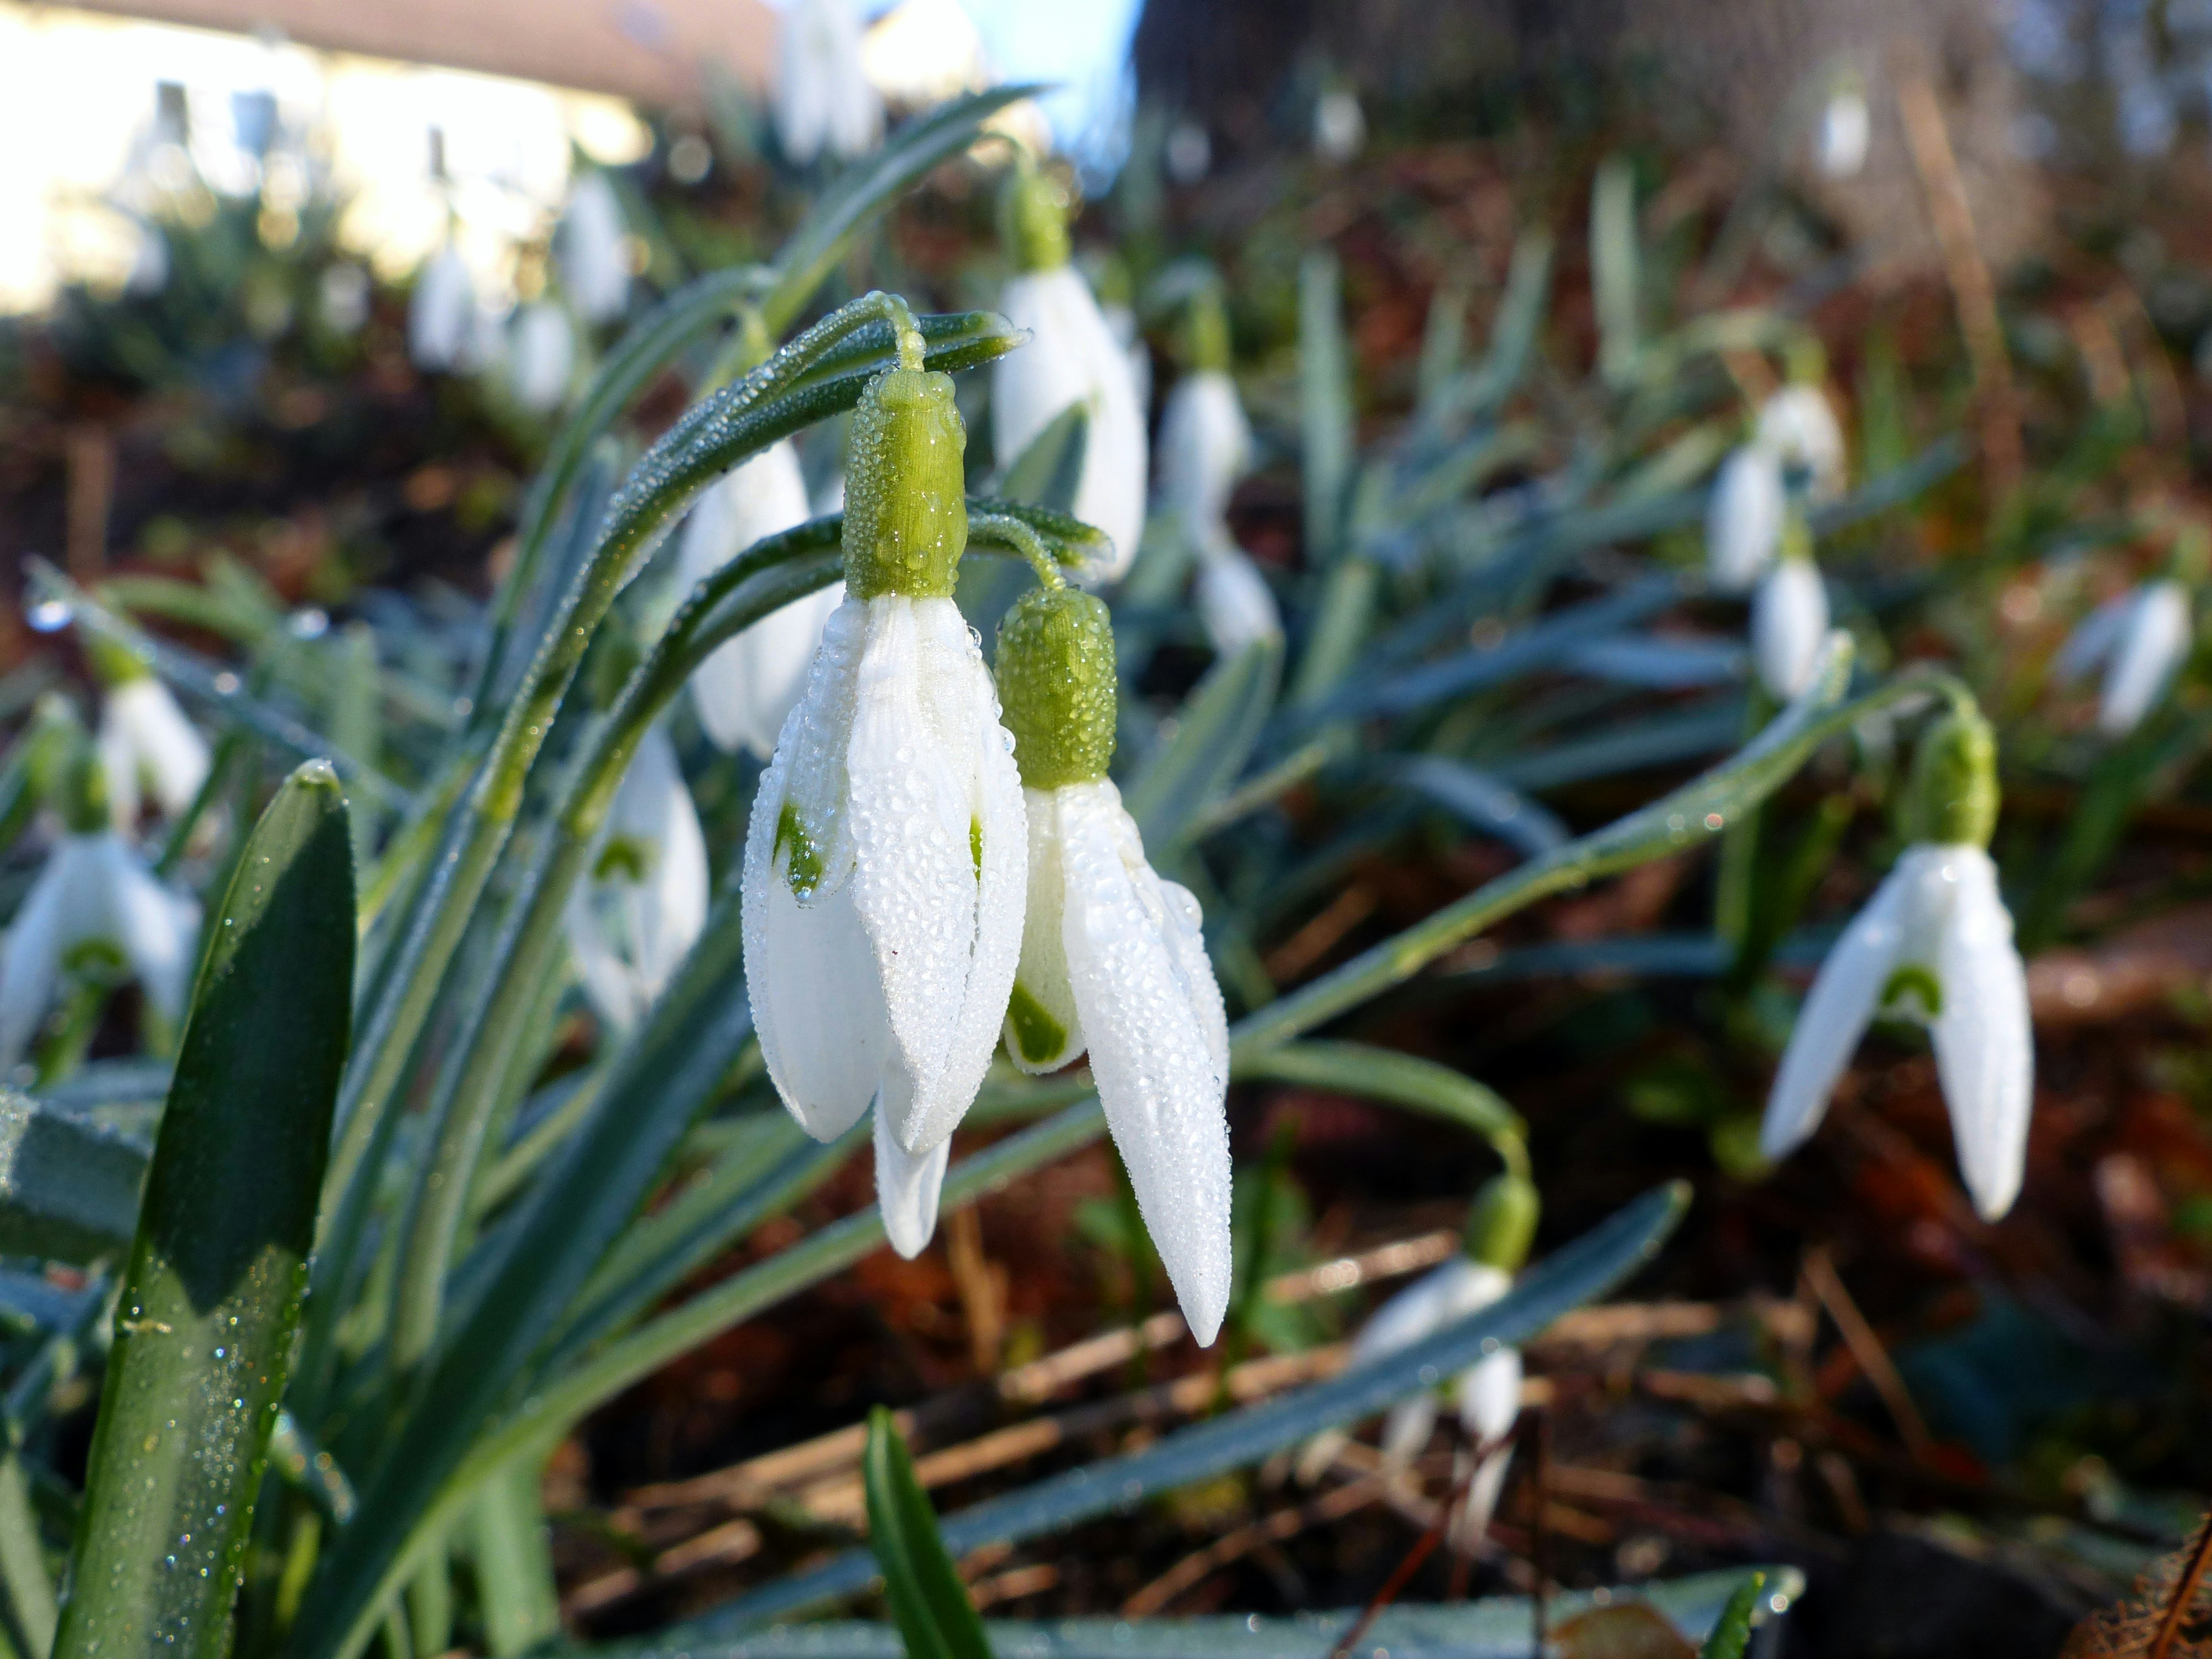 Snowdrops with dew